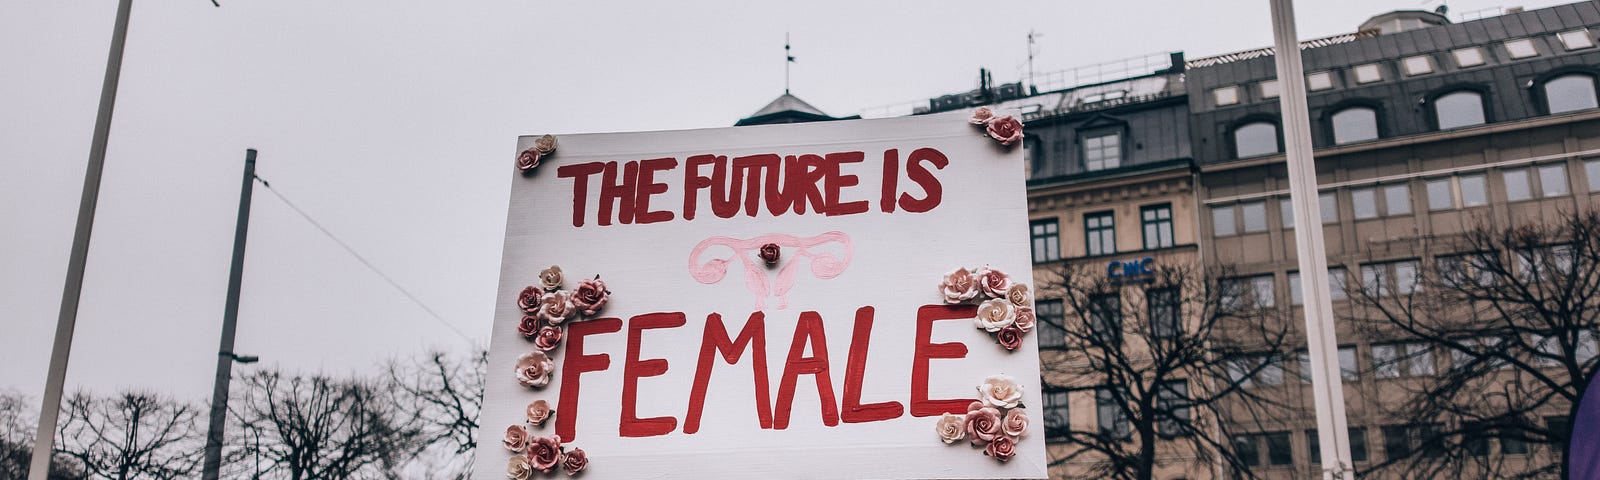 a crowd of picketing women with a sign The Future is Female (authentic equality)